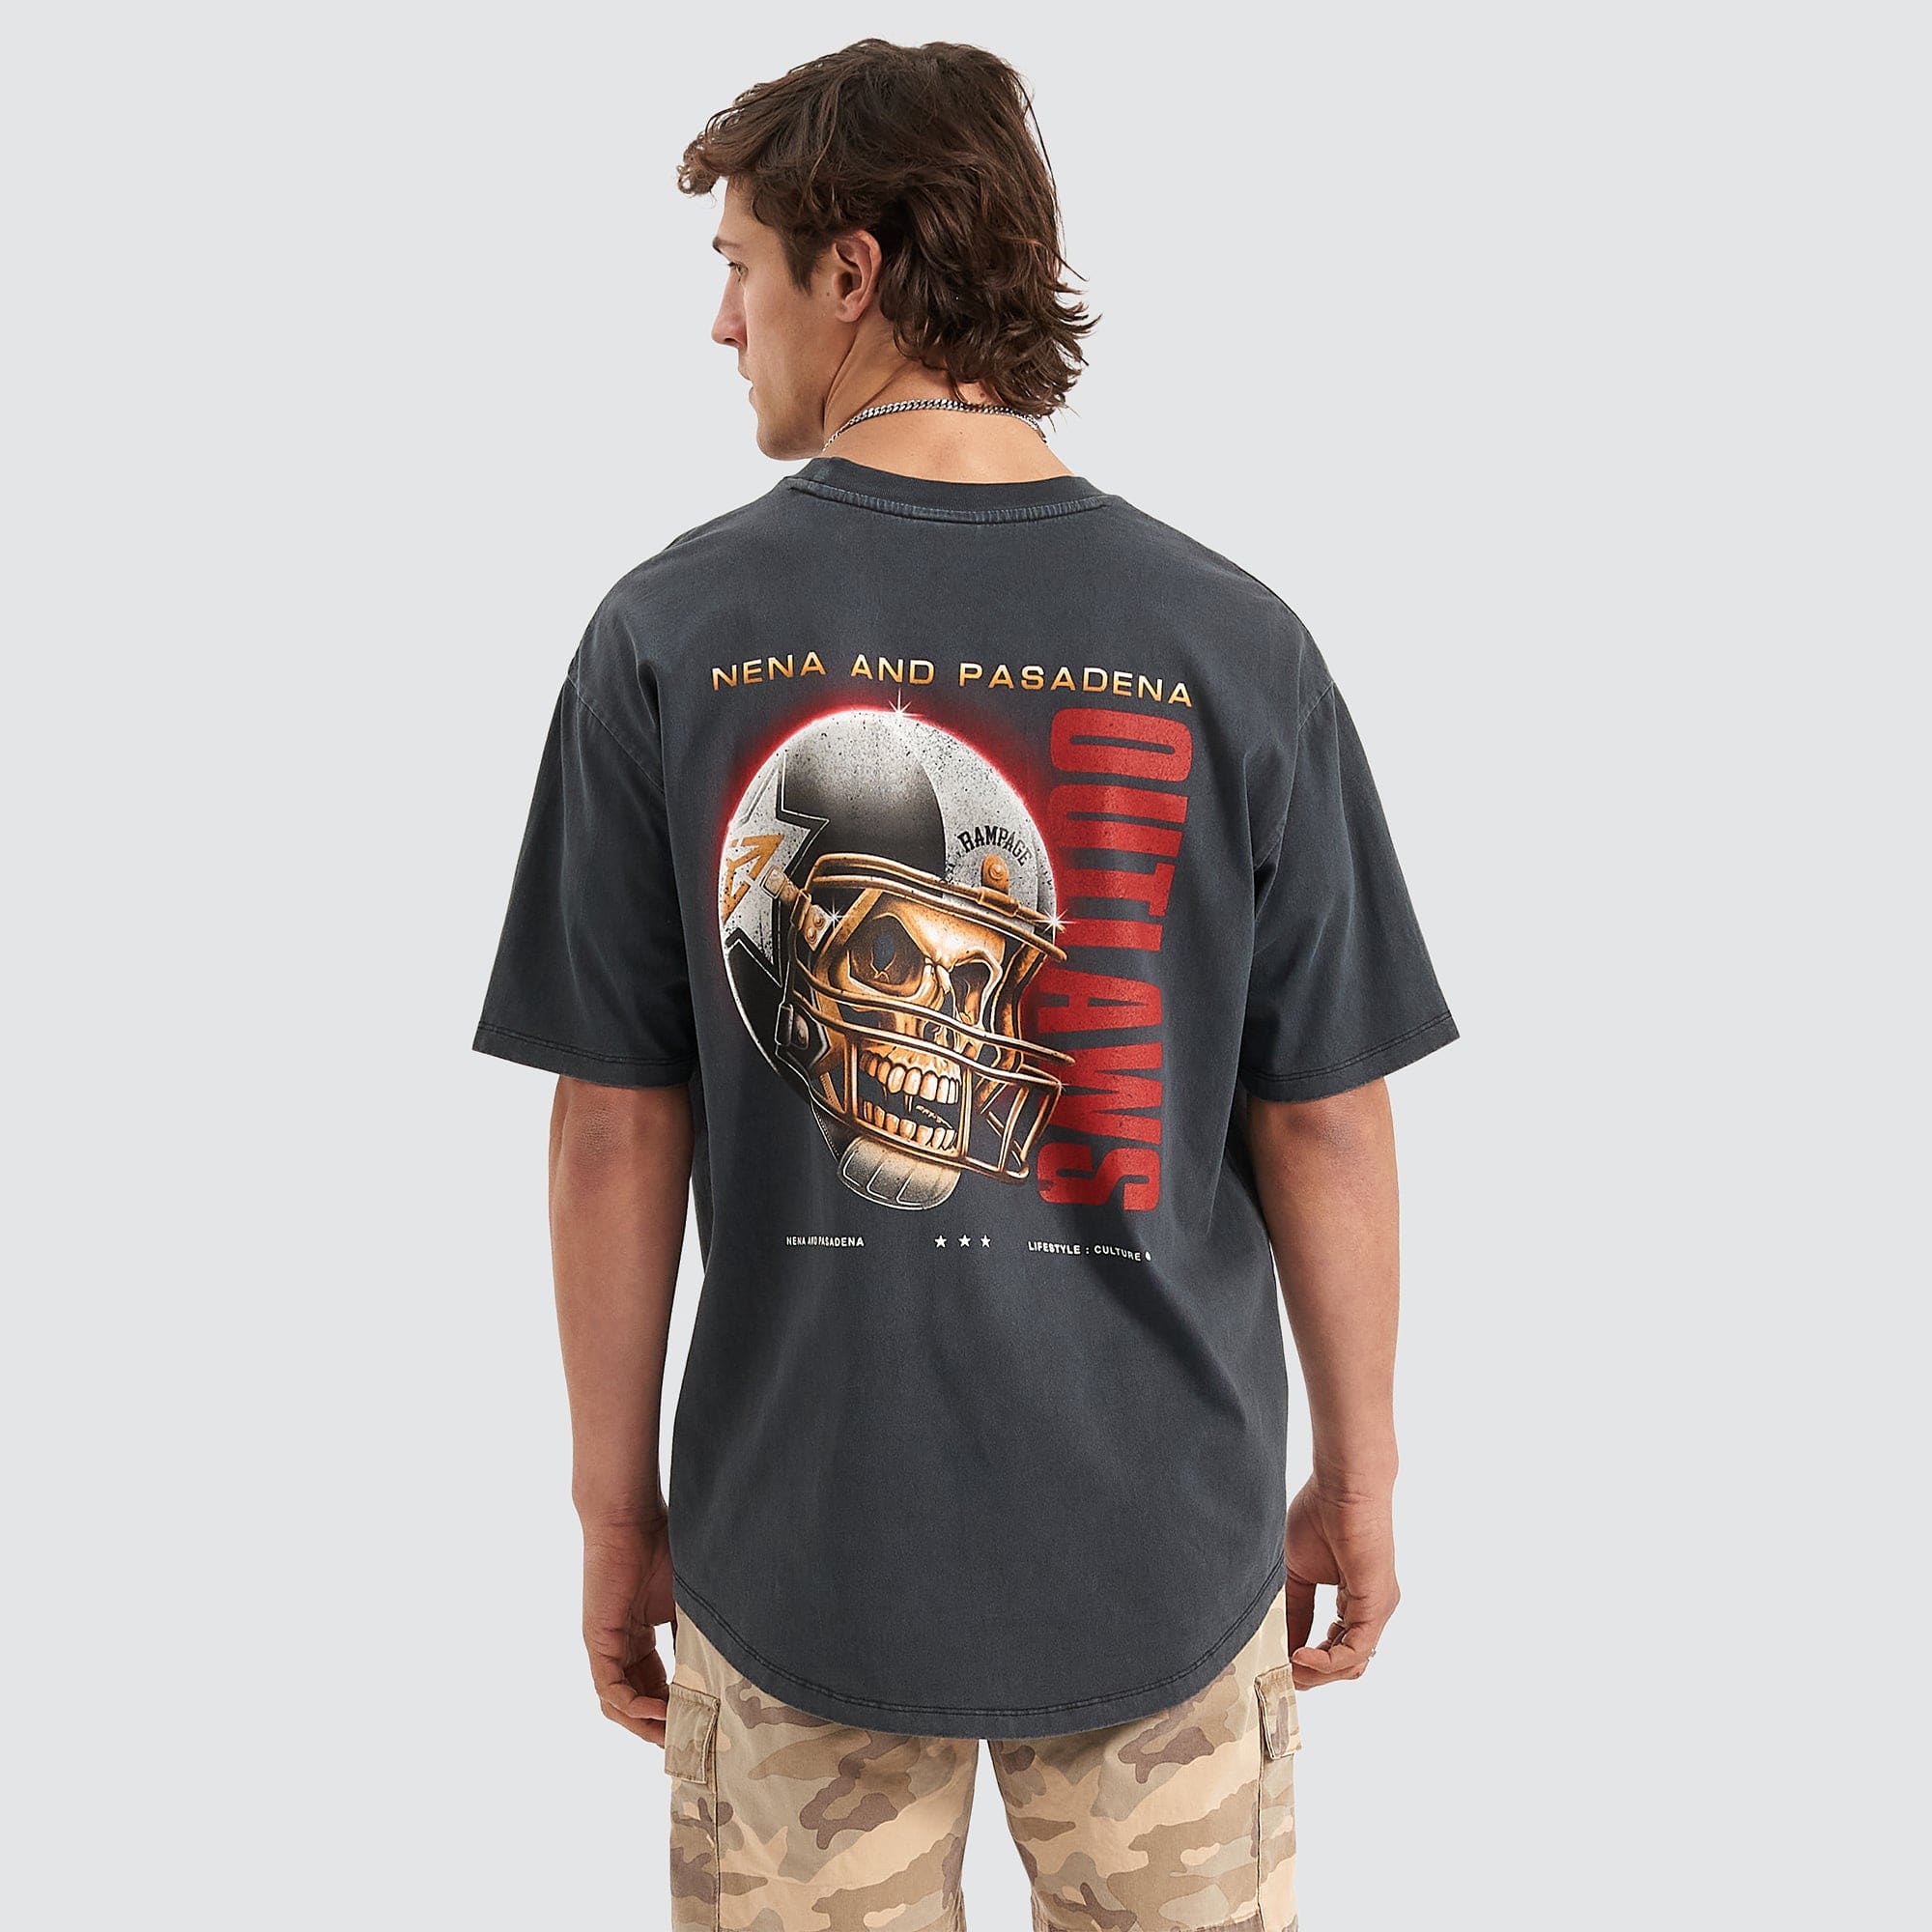 NXP OUTLAWS HEAVY BOX FIT SCOOP TEE